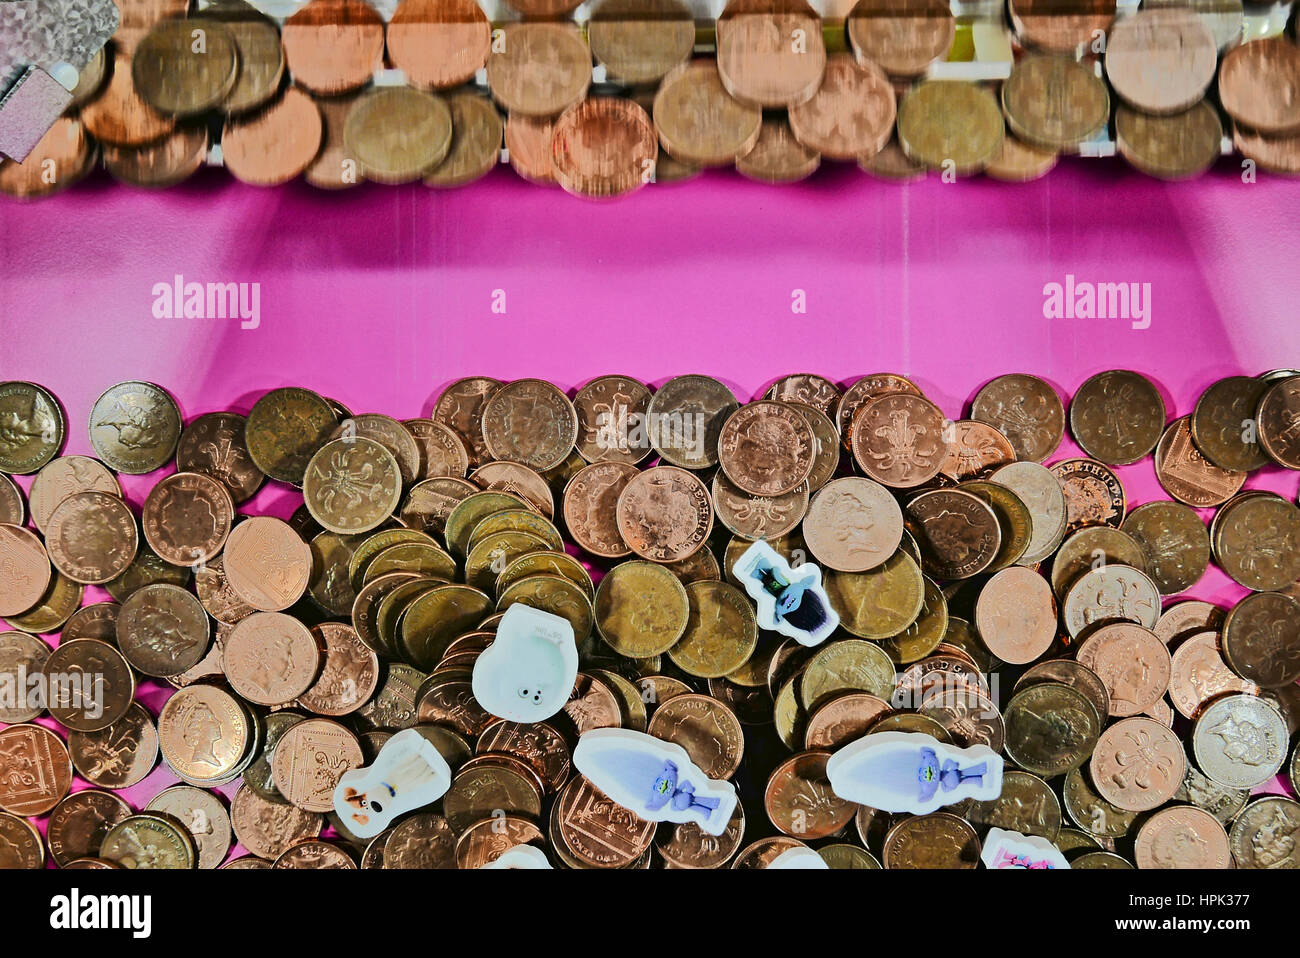 Two pence pieces and prizes in a ''shove penny'' arcade game Stock Photo